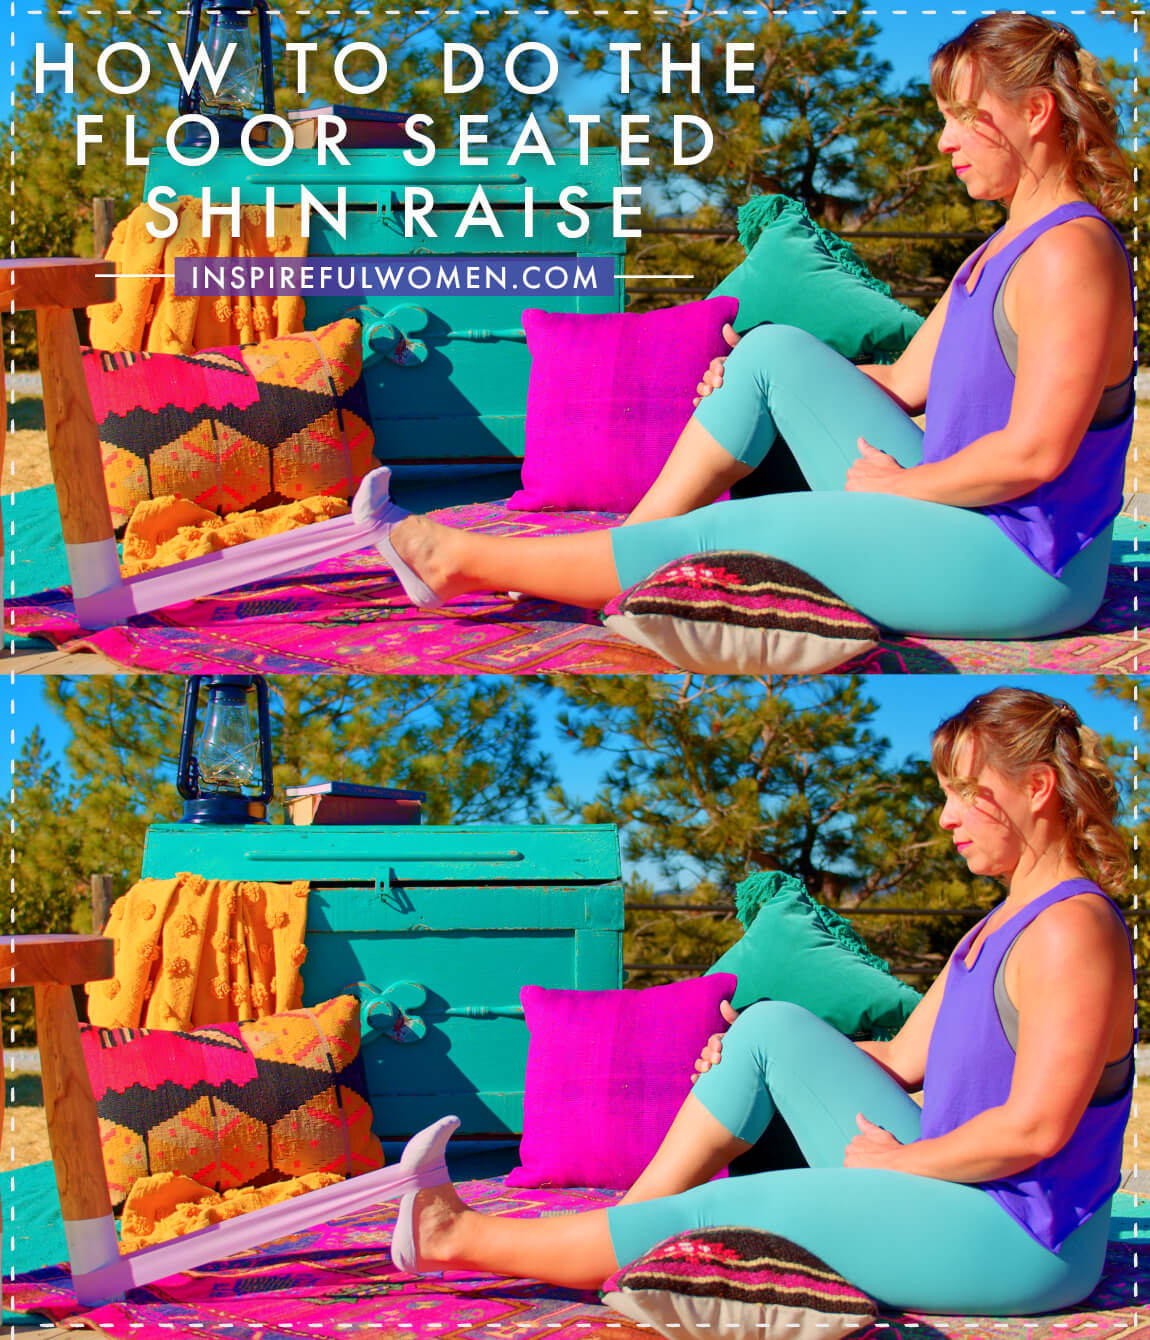 how-to-floor-seated-banded-shin-raises-ankle-dorsiflexion-tibialis-anterior-exercise-proper-form